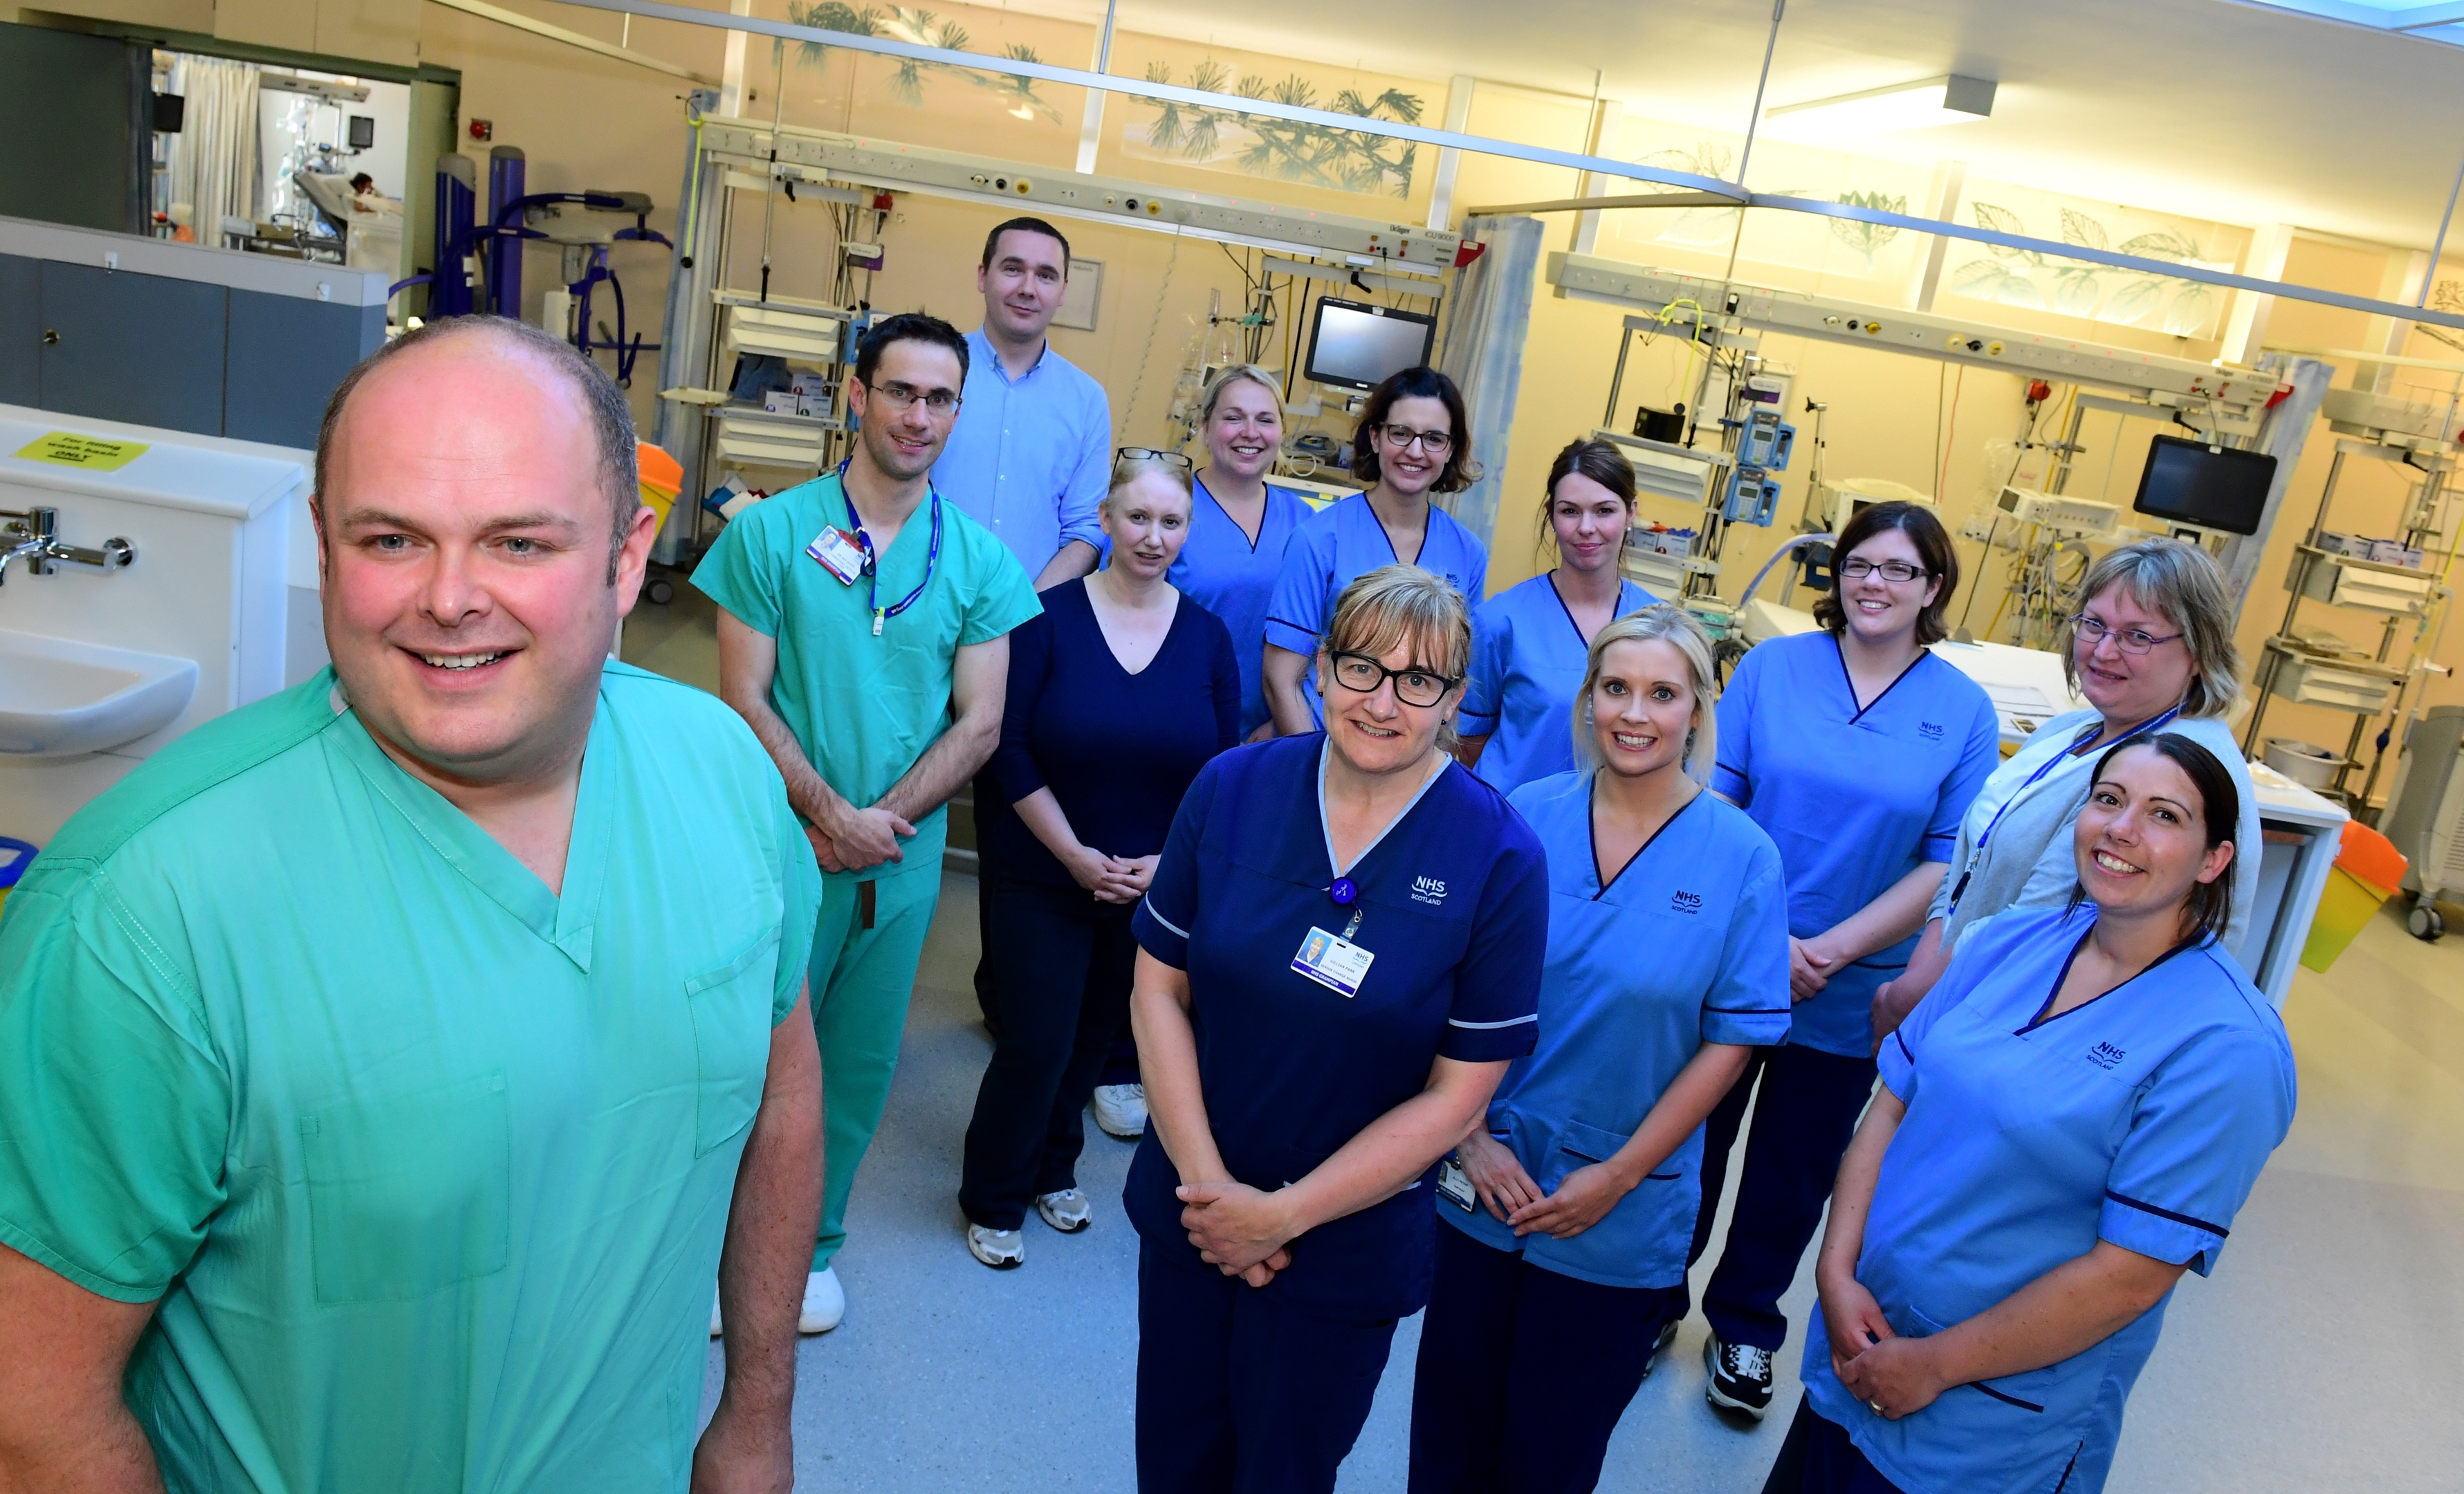 The Intensive Care Unit at Aberdeen Royal Infirmary. Pictured - Dr Ian Macleod (front) with the doctors and nurses in ICU.
Picture by Kami Thomson